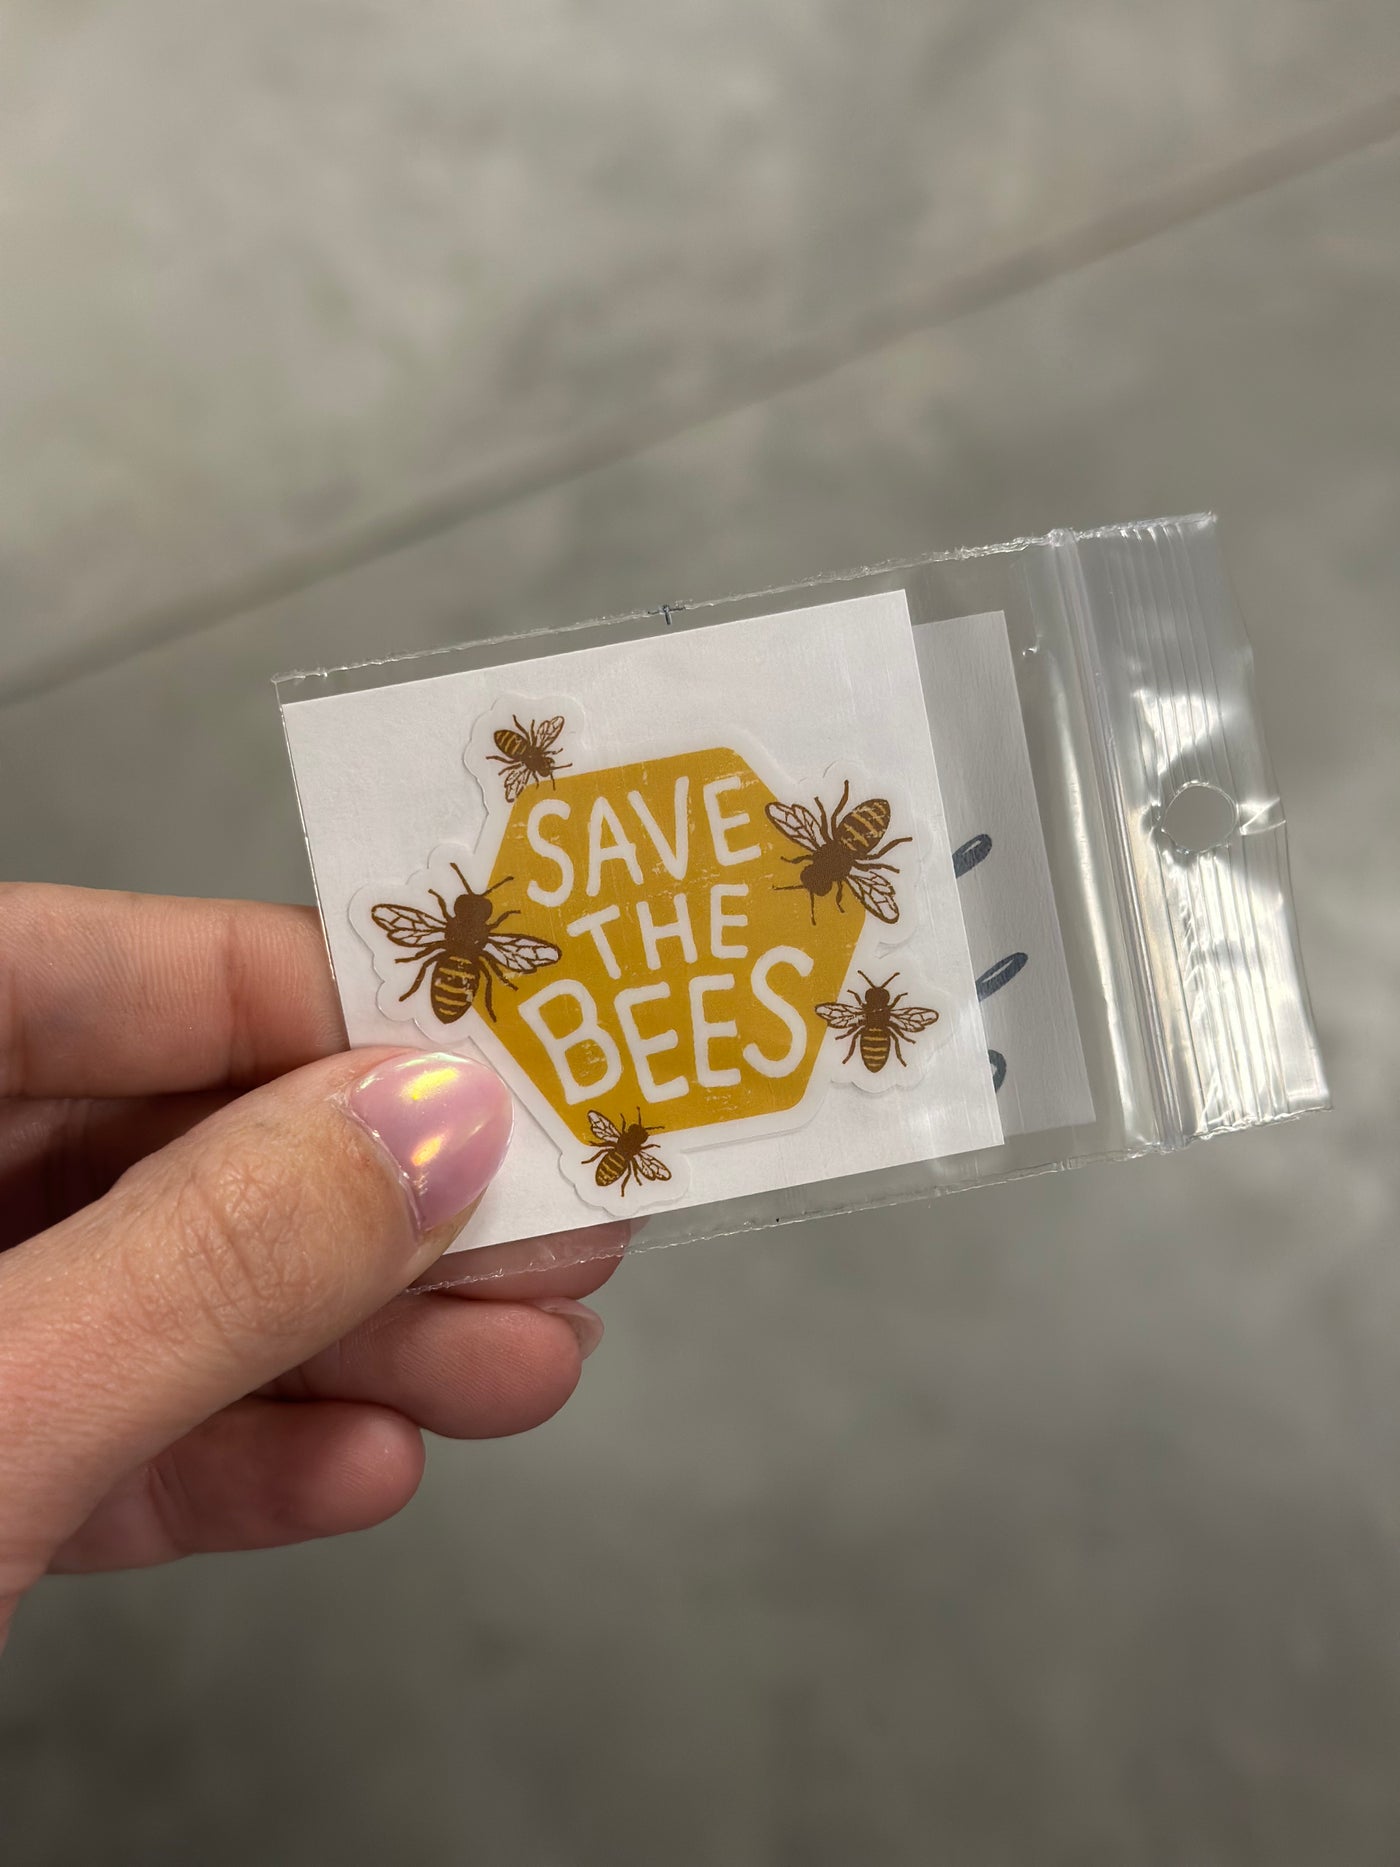 Save the bees sticker